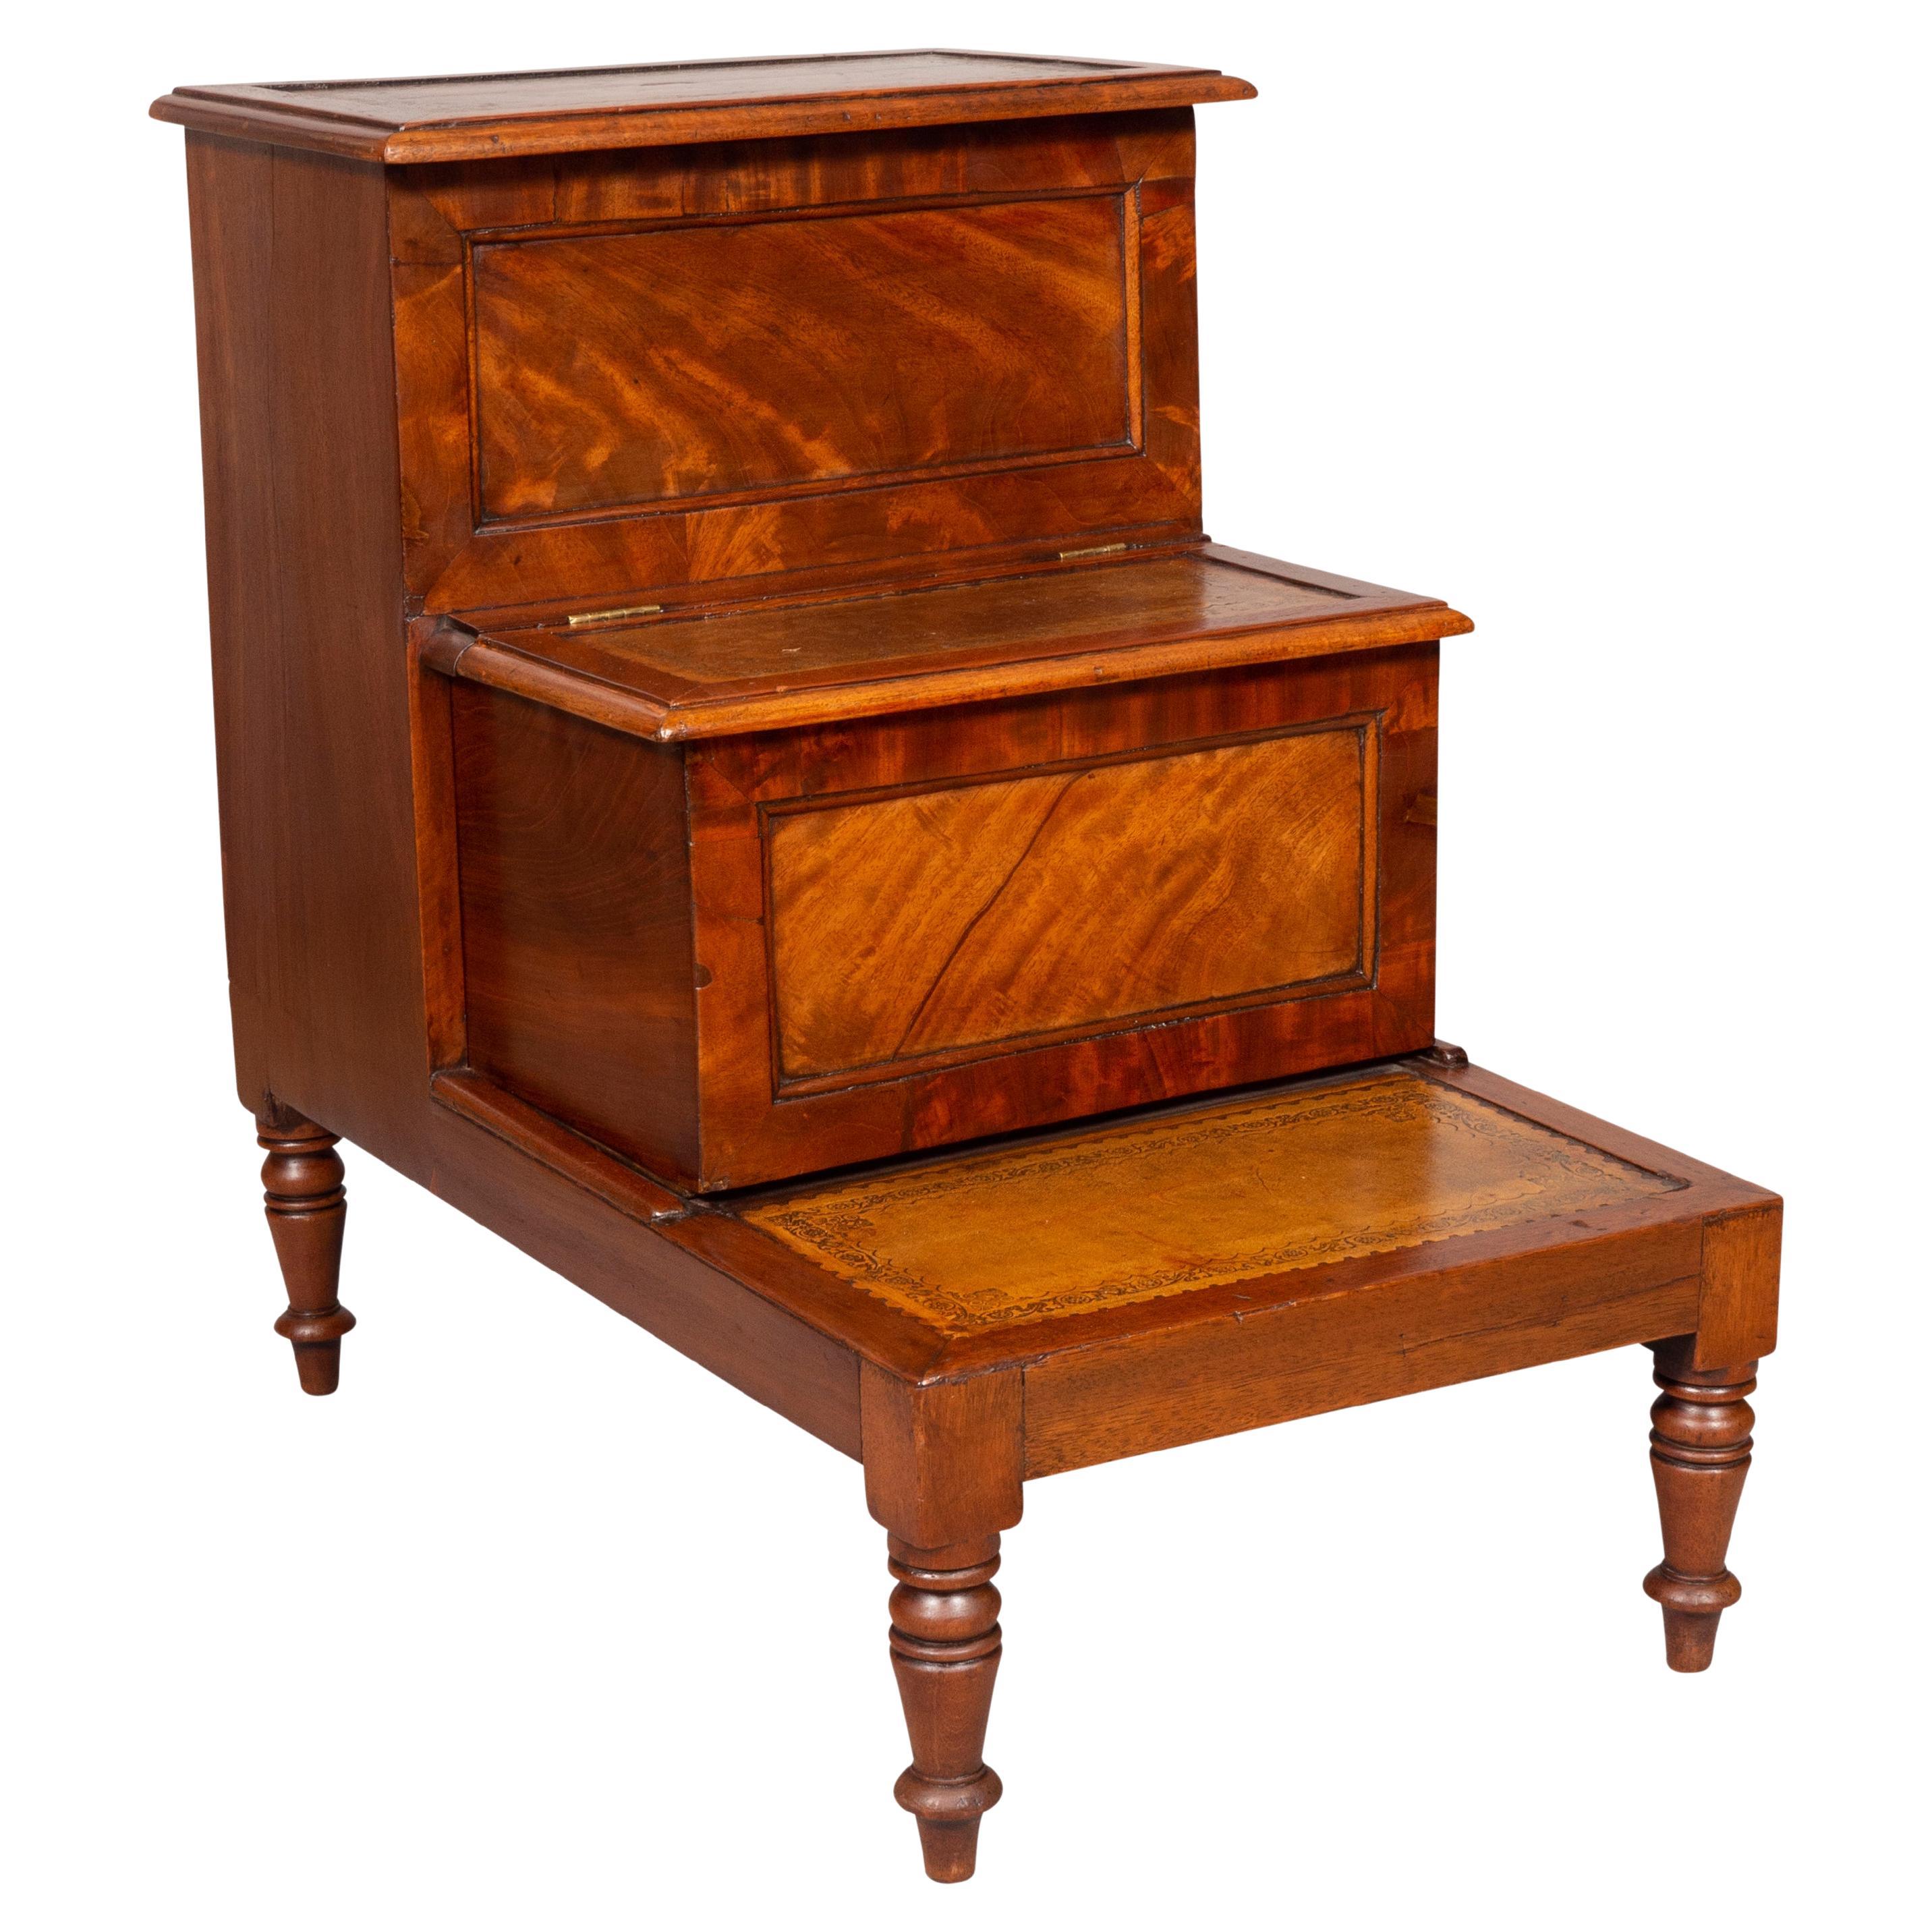 With brown leather steps in a rich mahogany and hidden compartment, raised on turned feet.